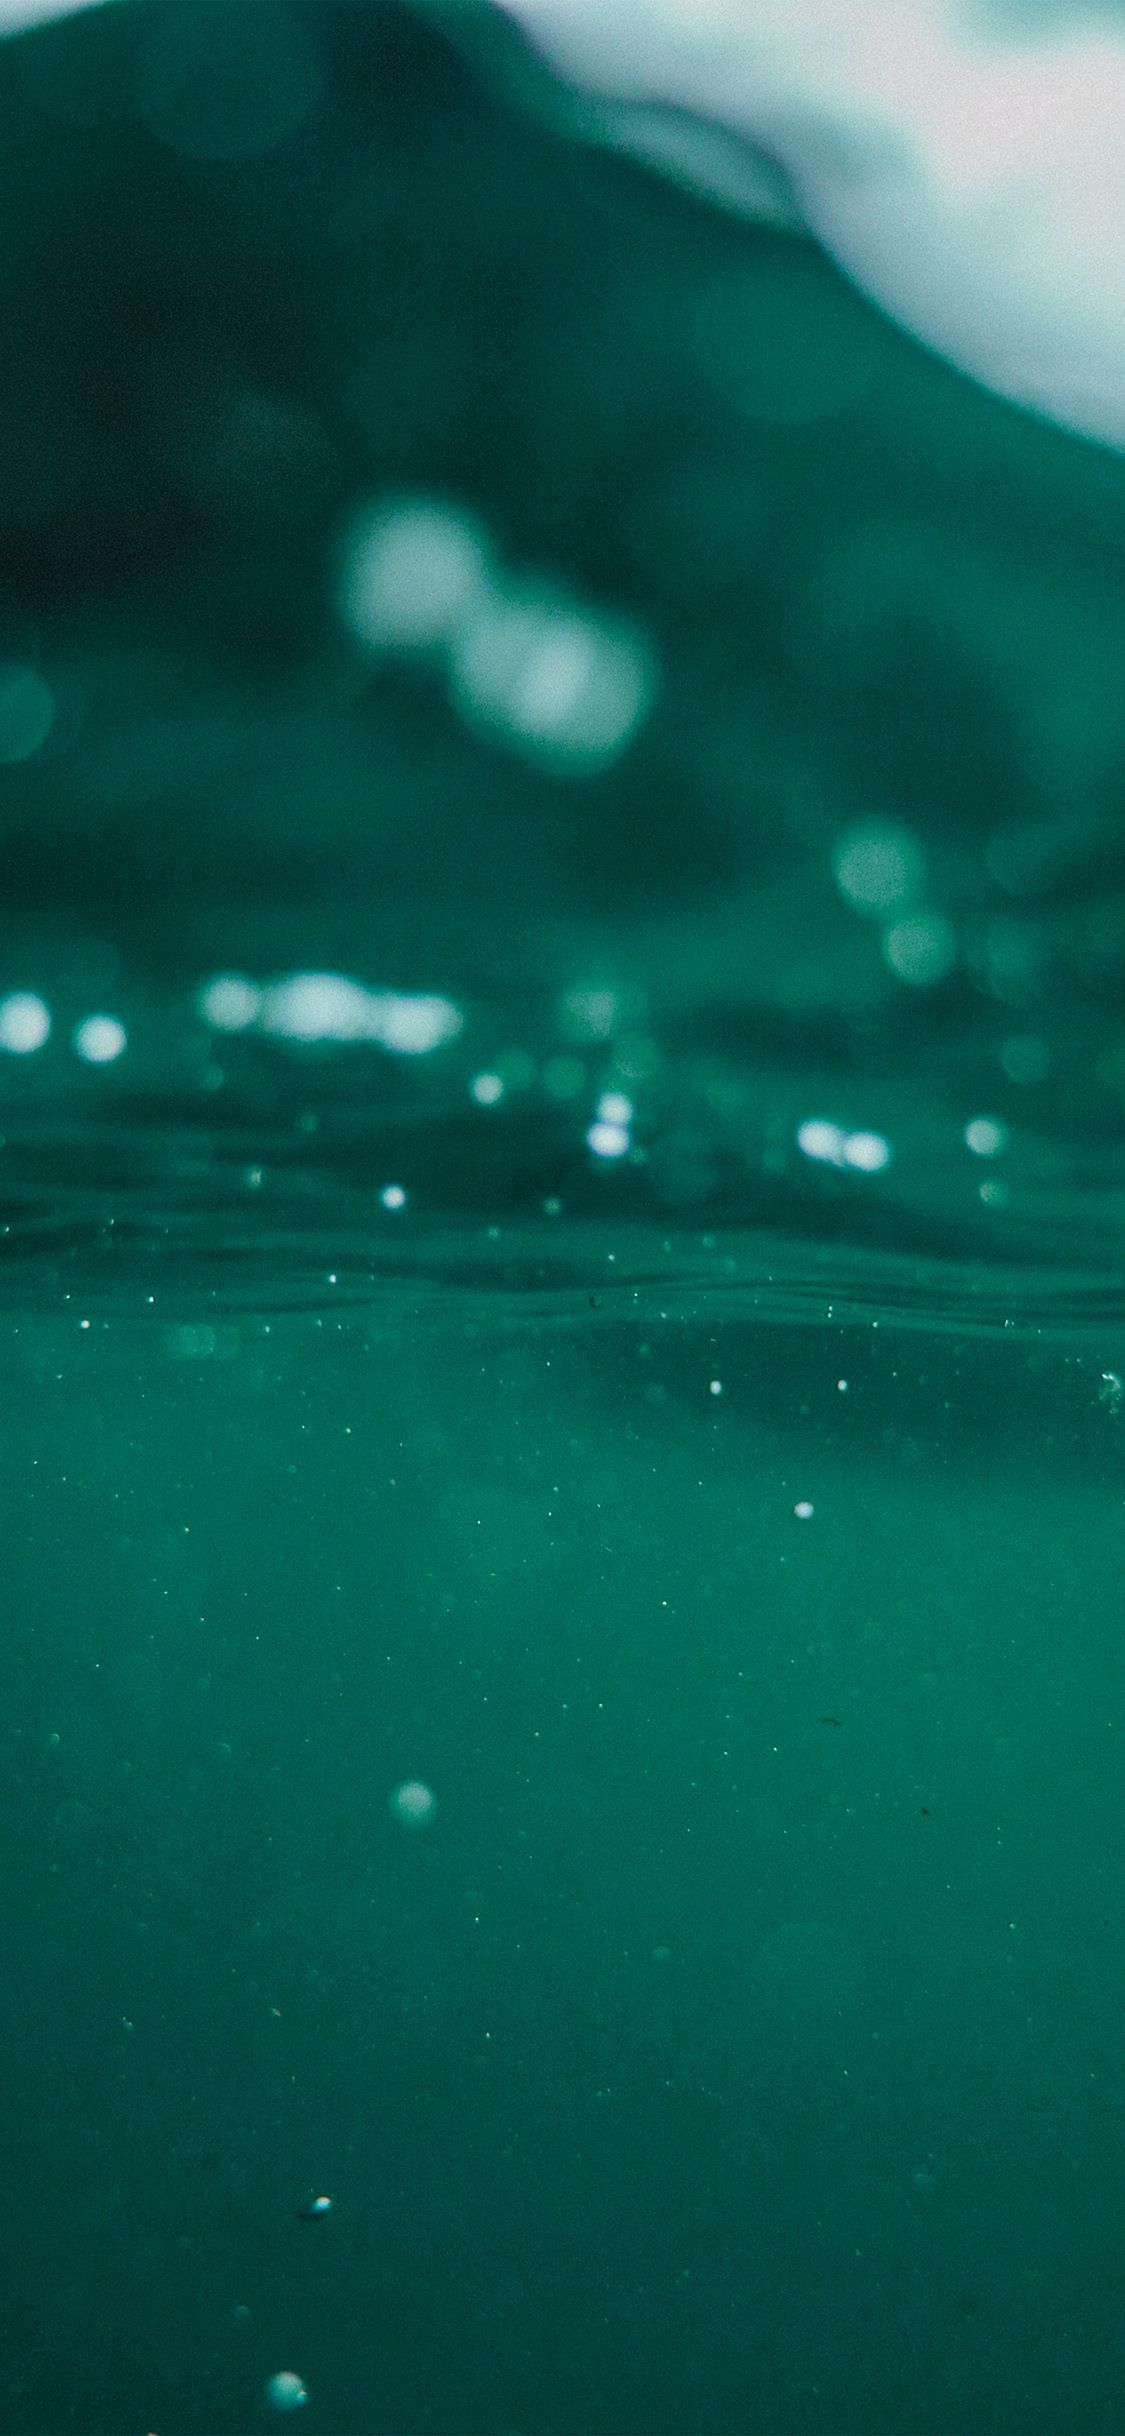 A close up of water with bubbles - Underwater